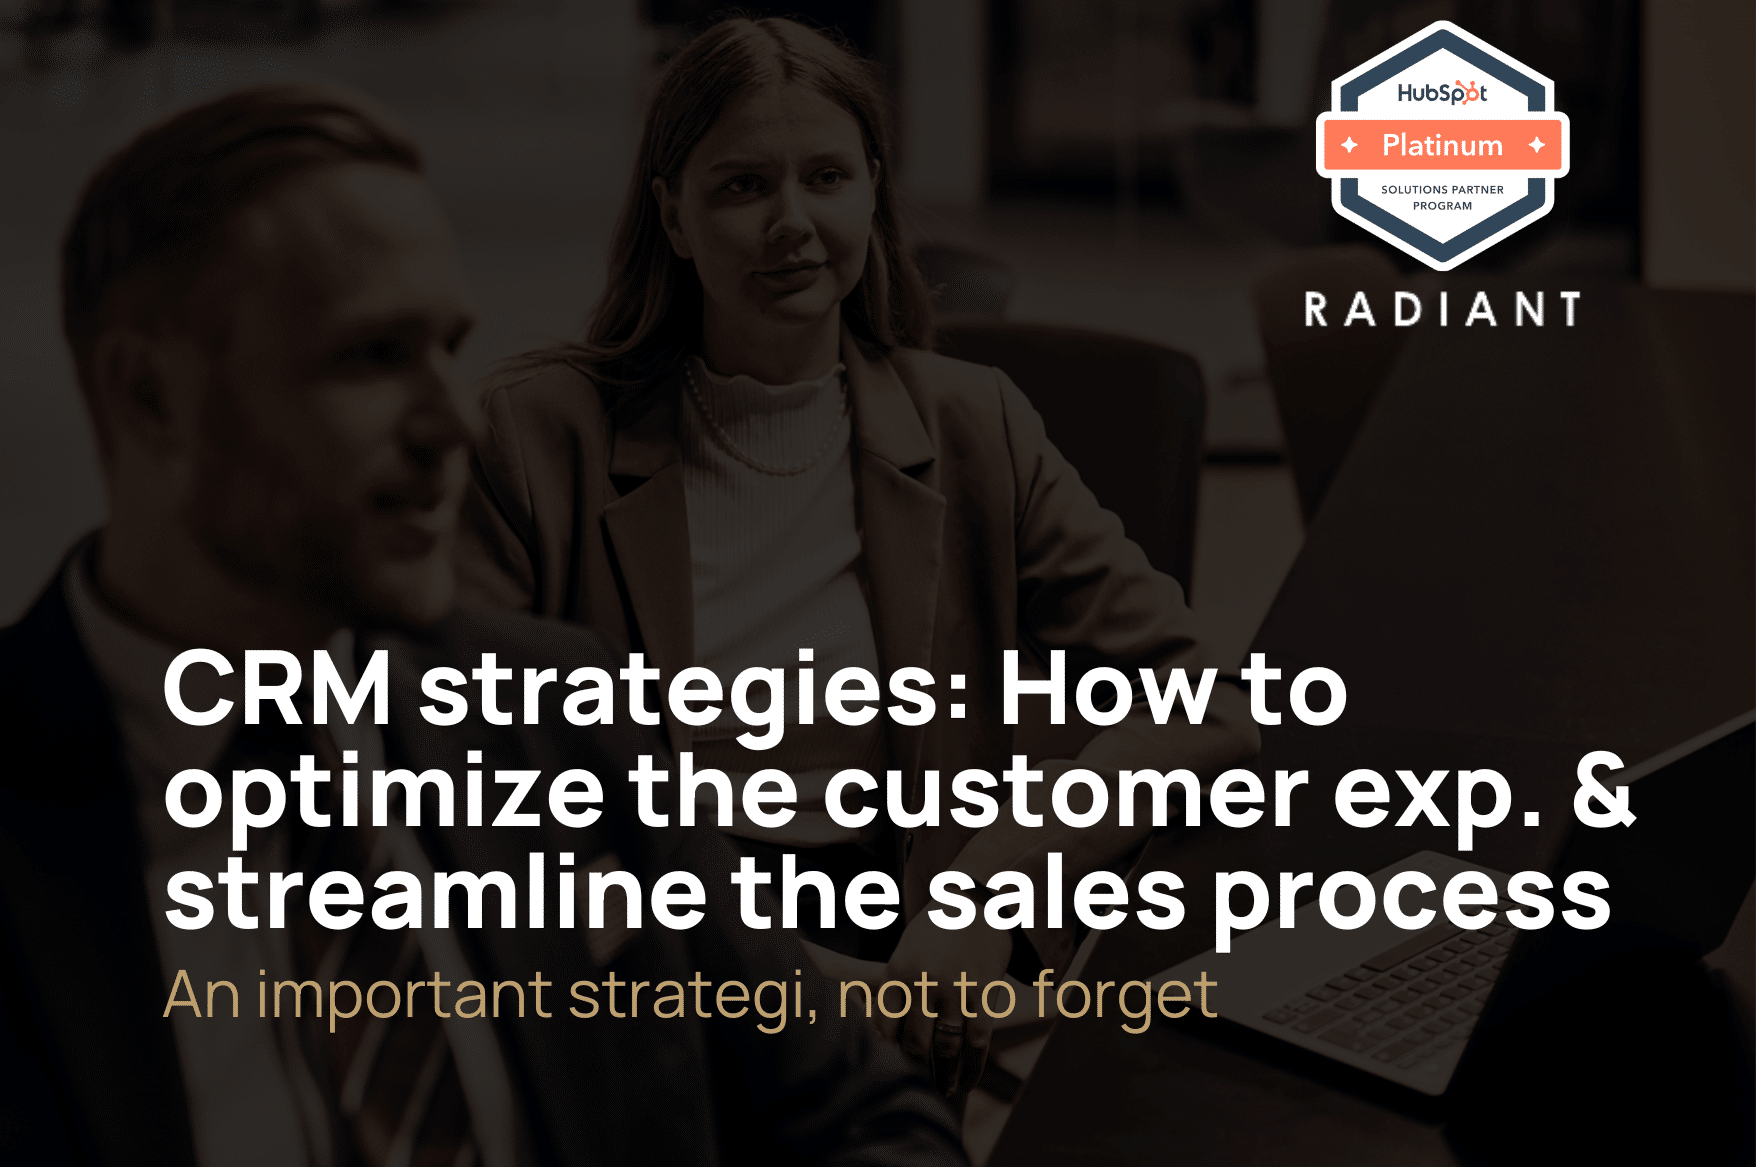 CRM strategies: How to optimize the customer experience and streamline the sales process